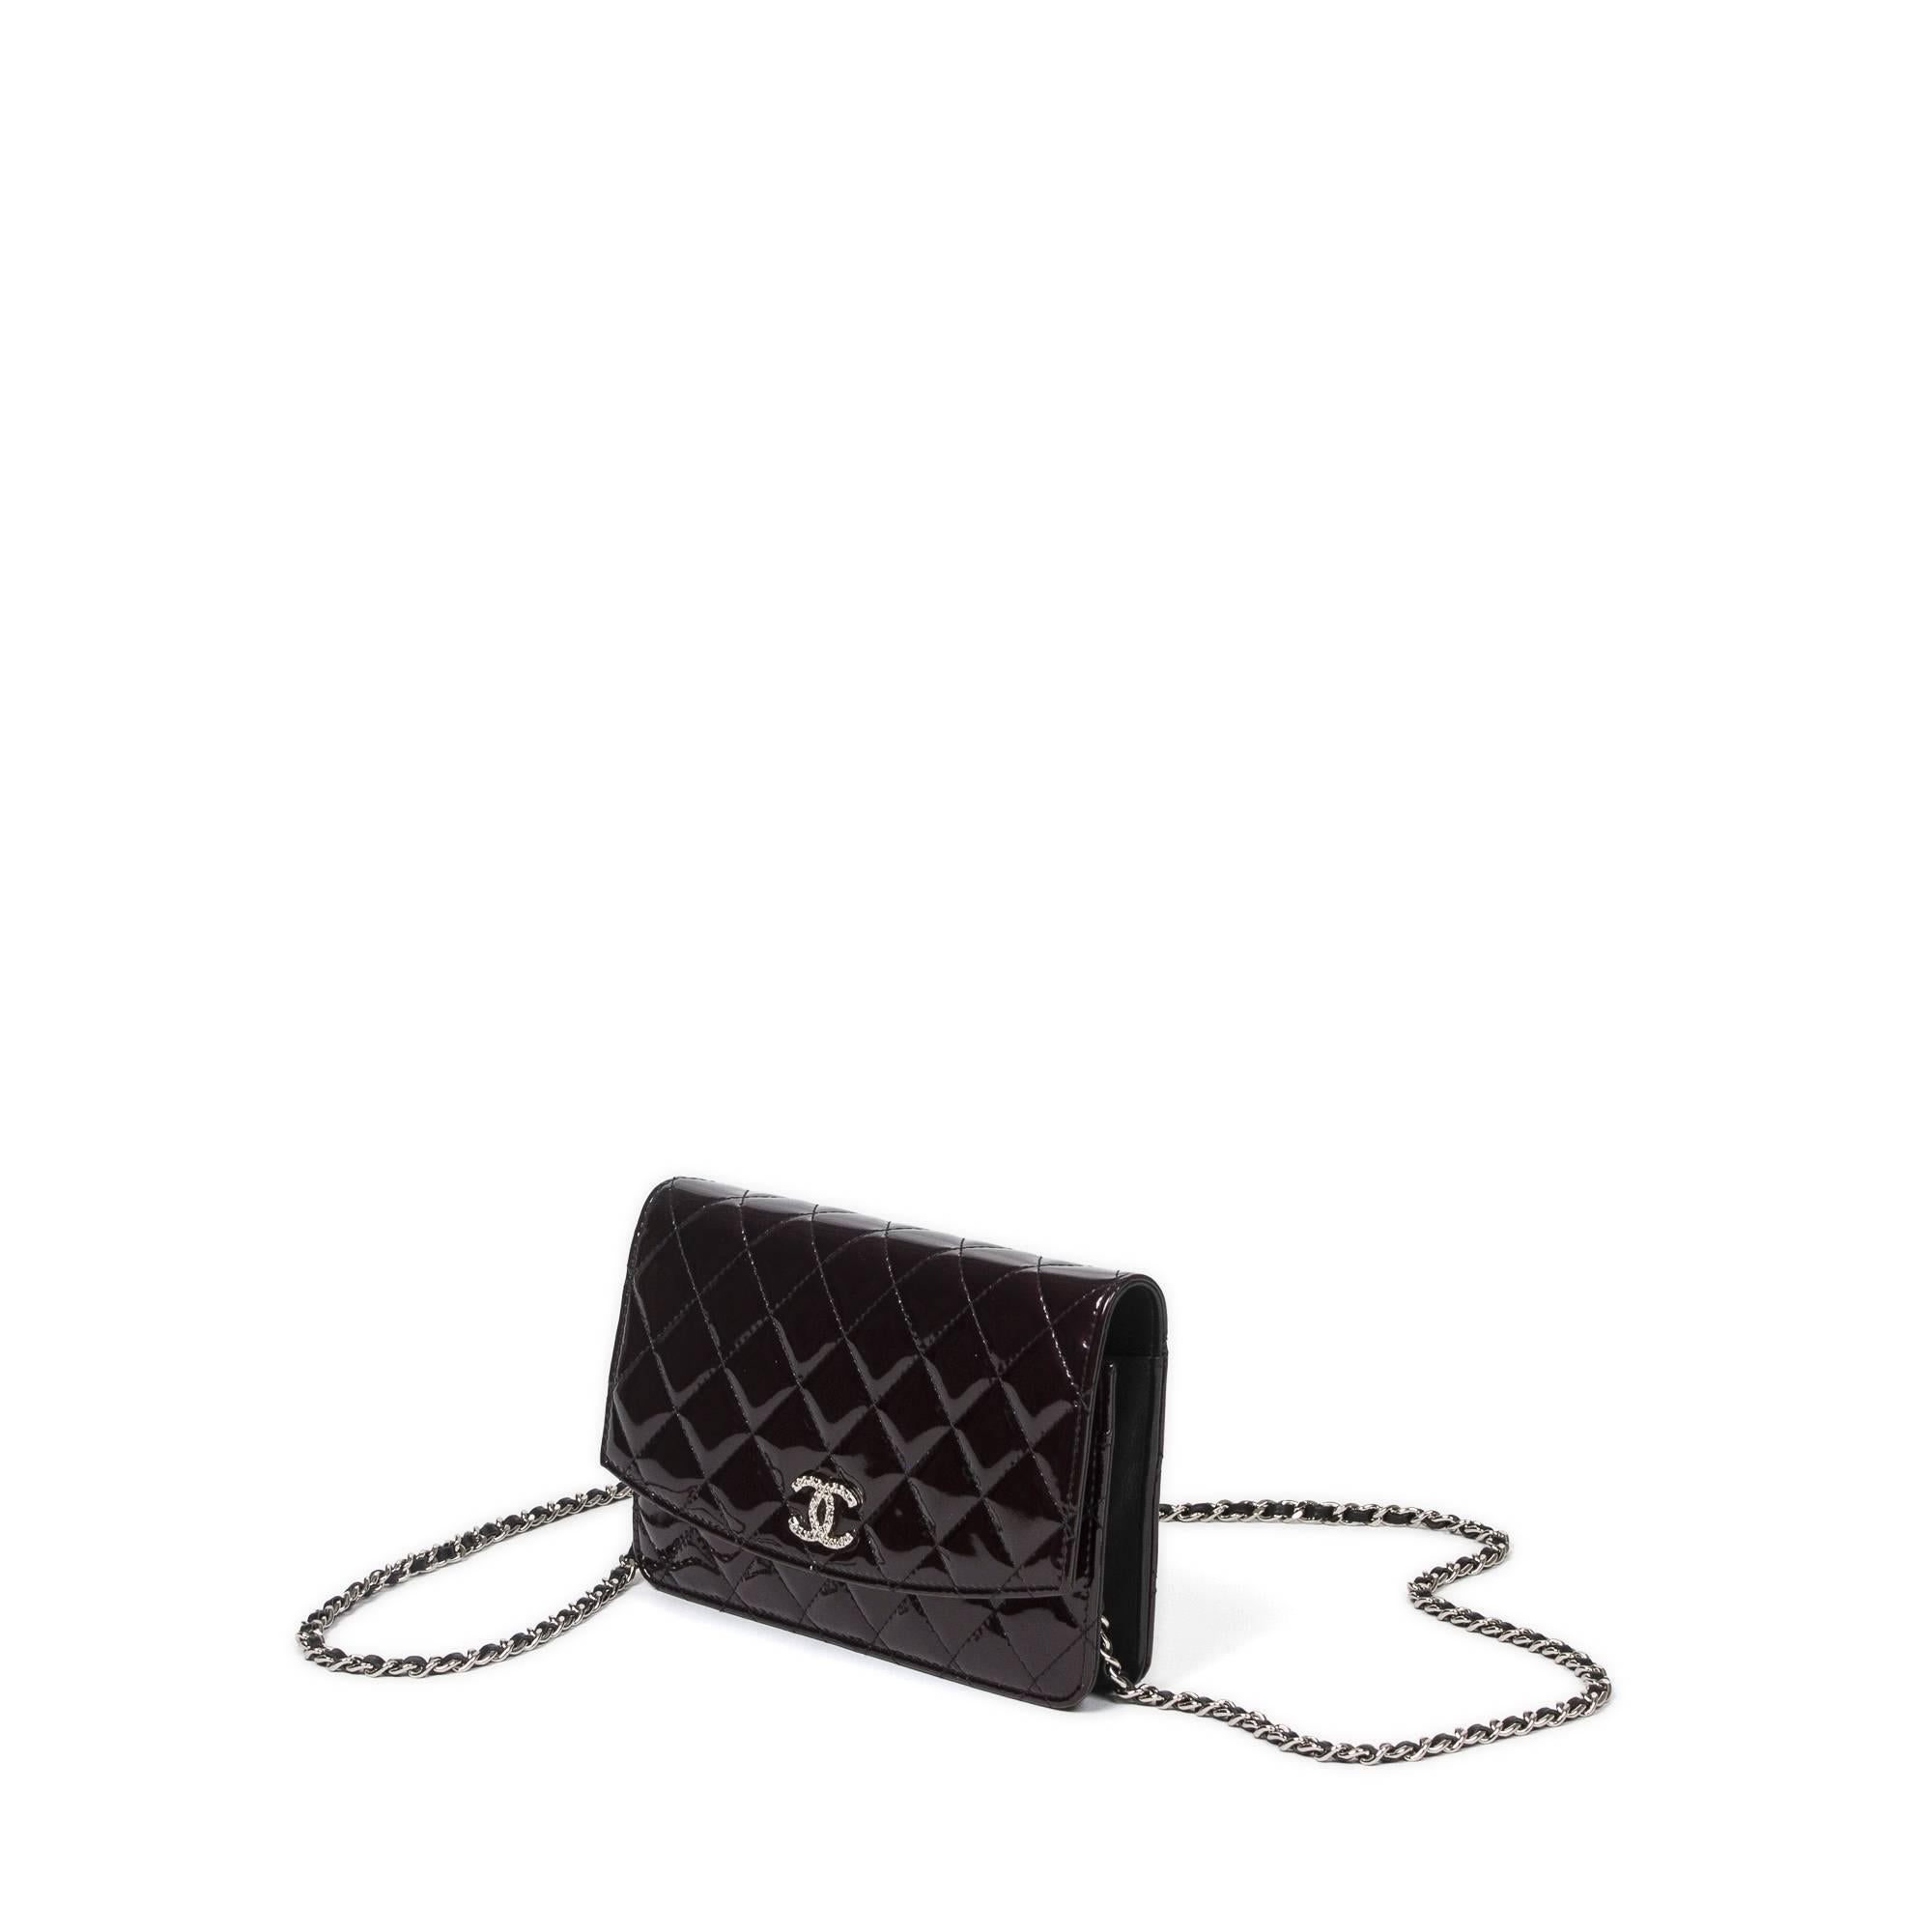 Chanel Wallet On Chain 19cm in black quilted patent leather with long chain strap interlaced with black leather (60cm), silver tone hardware. Snap button closure. Black canvas lined interior with 2 zip pockets, 2 slip pockets and 6 card slots.